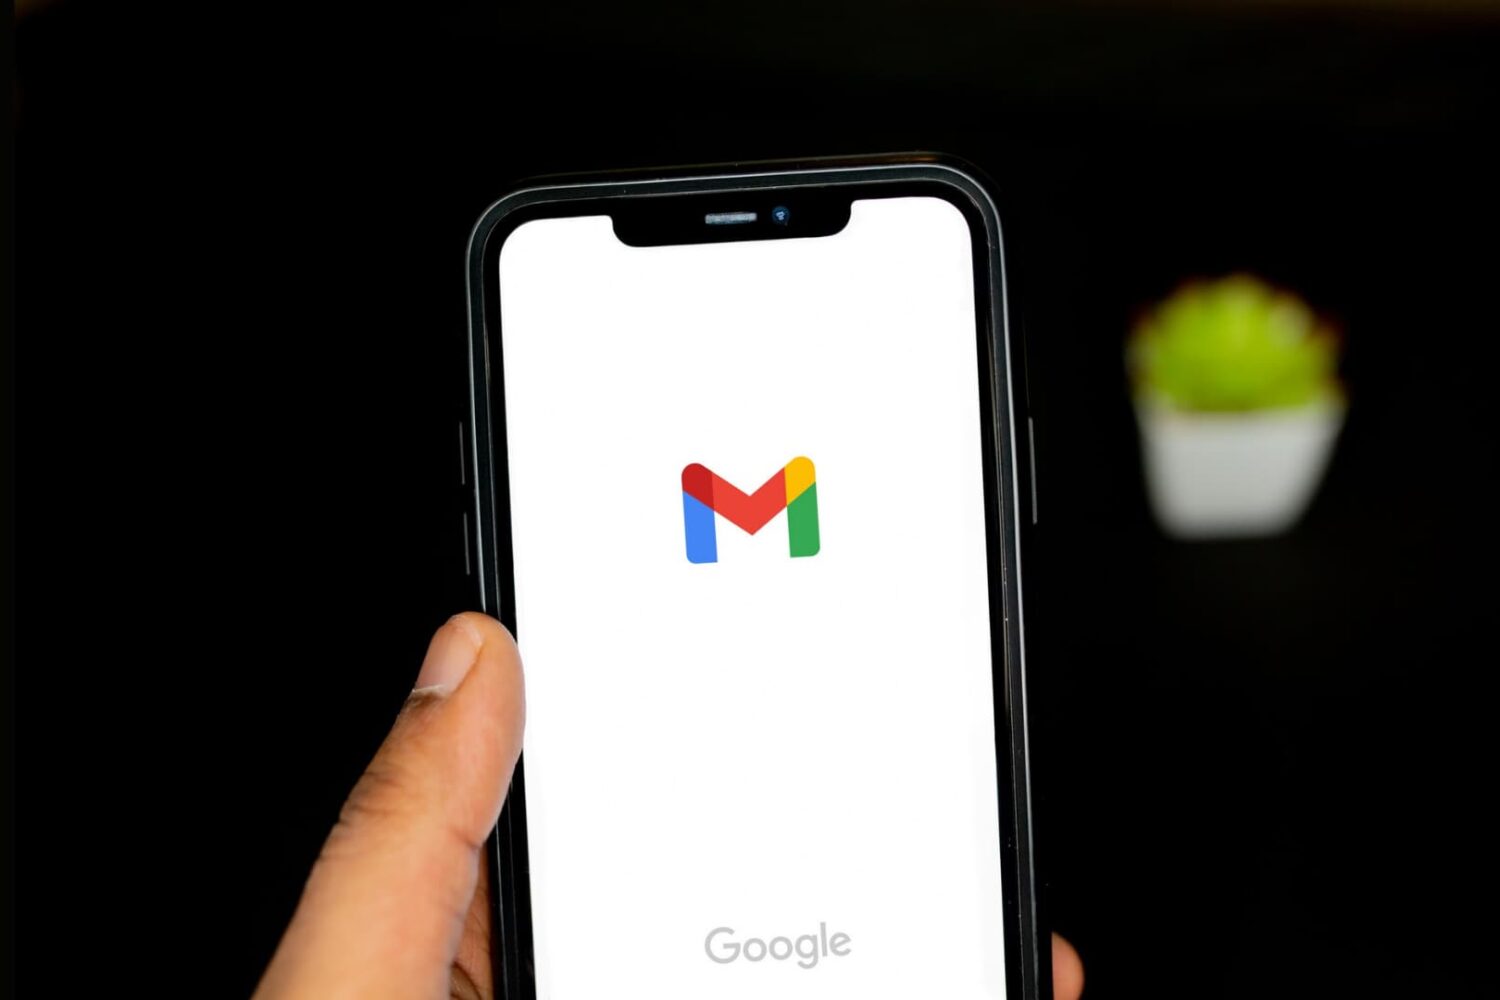 A hand holding iPhone with Gmail logo on the screen